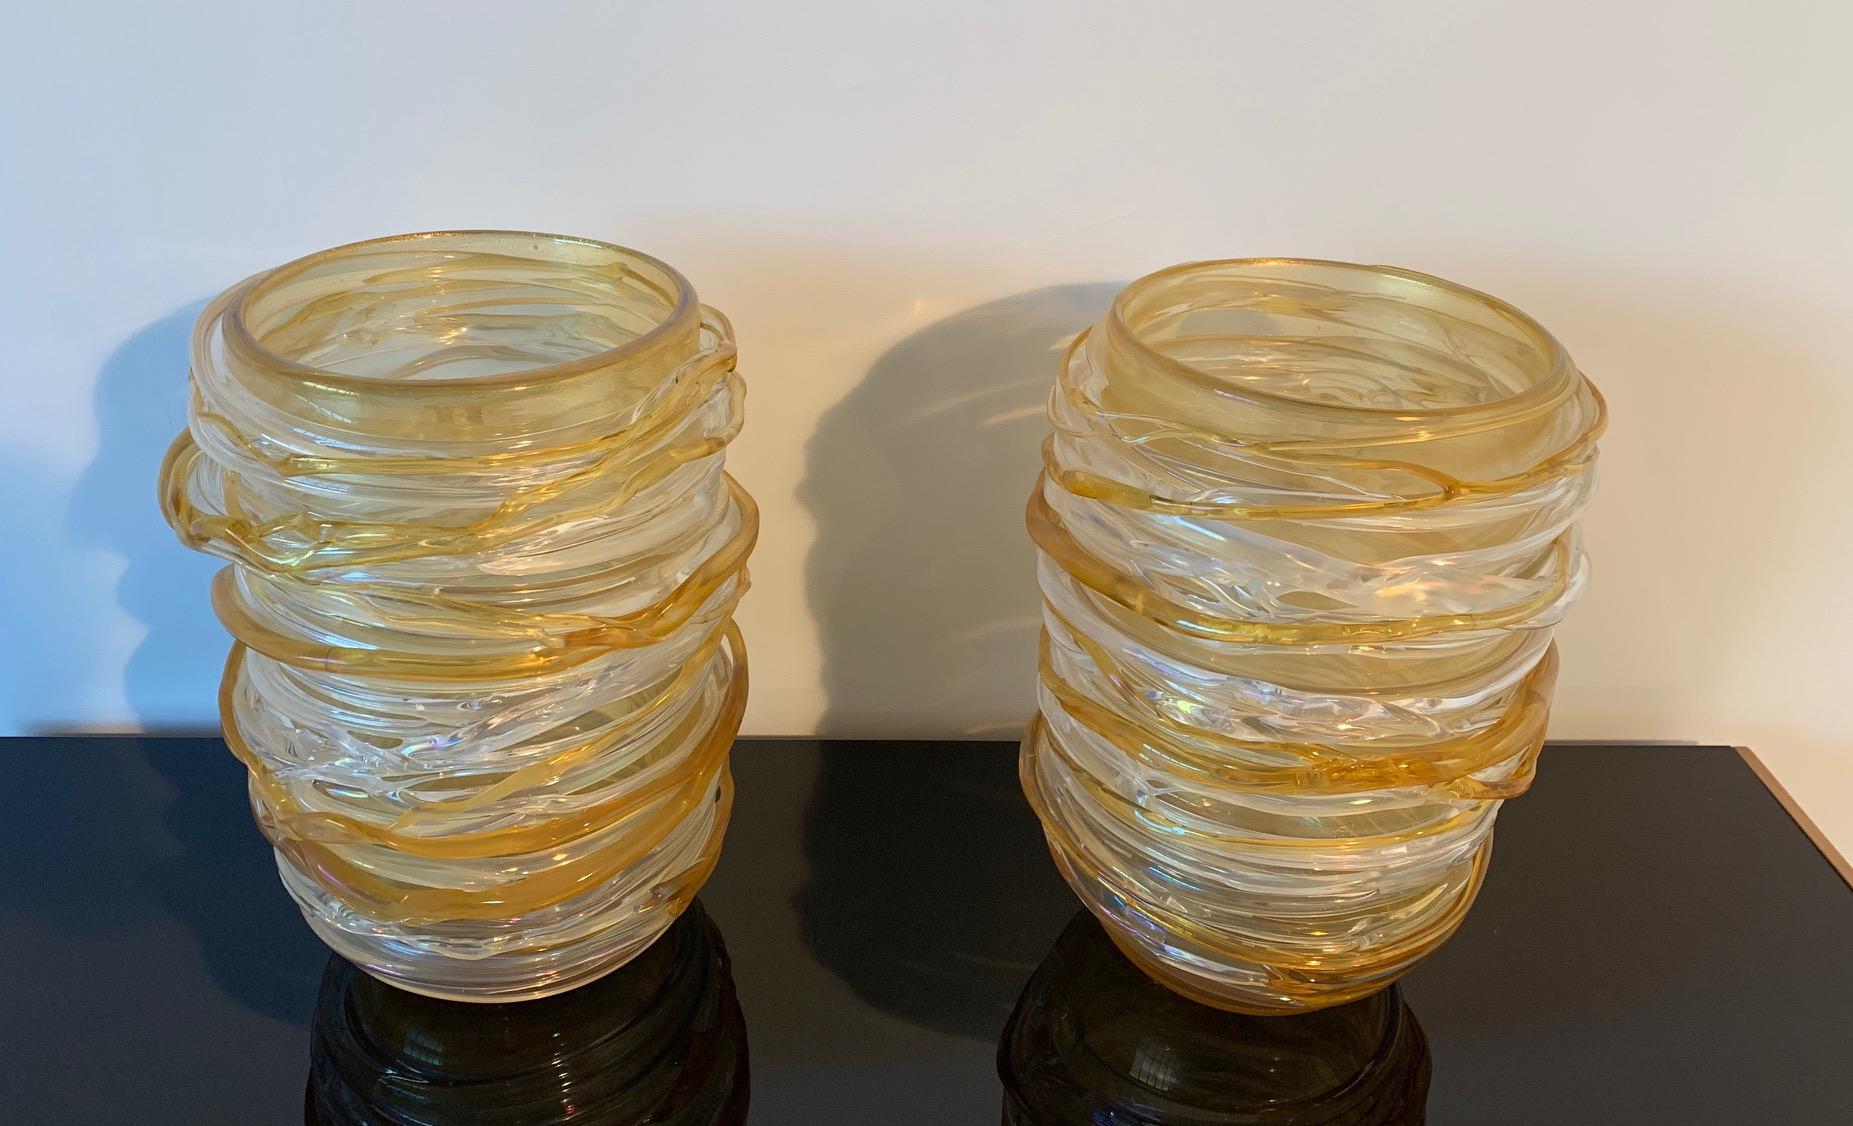 This pair of large yellow Murano glass vases are signed by Cenedese on the base.